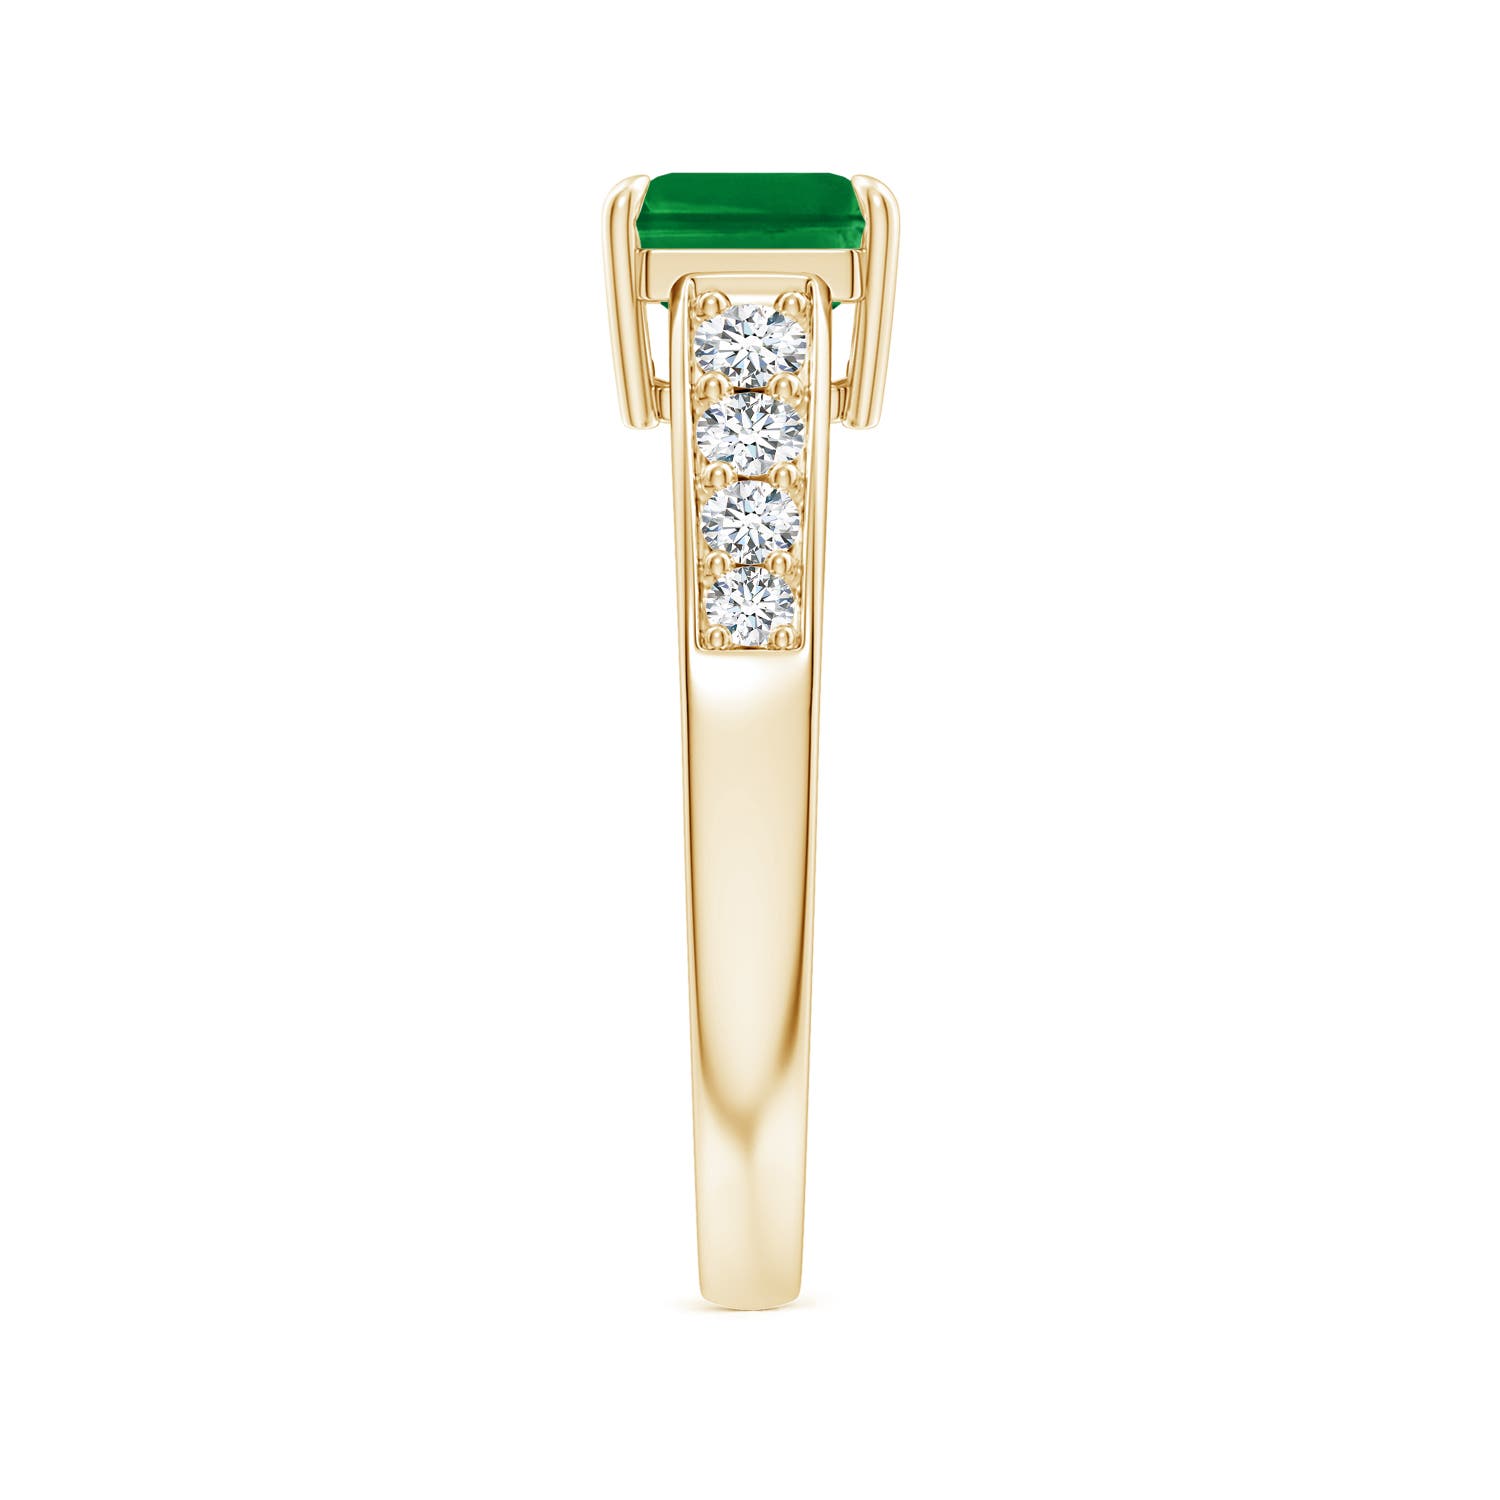 AAA - Emerald / 1.82 CT / 14 KT Yellow Gold